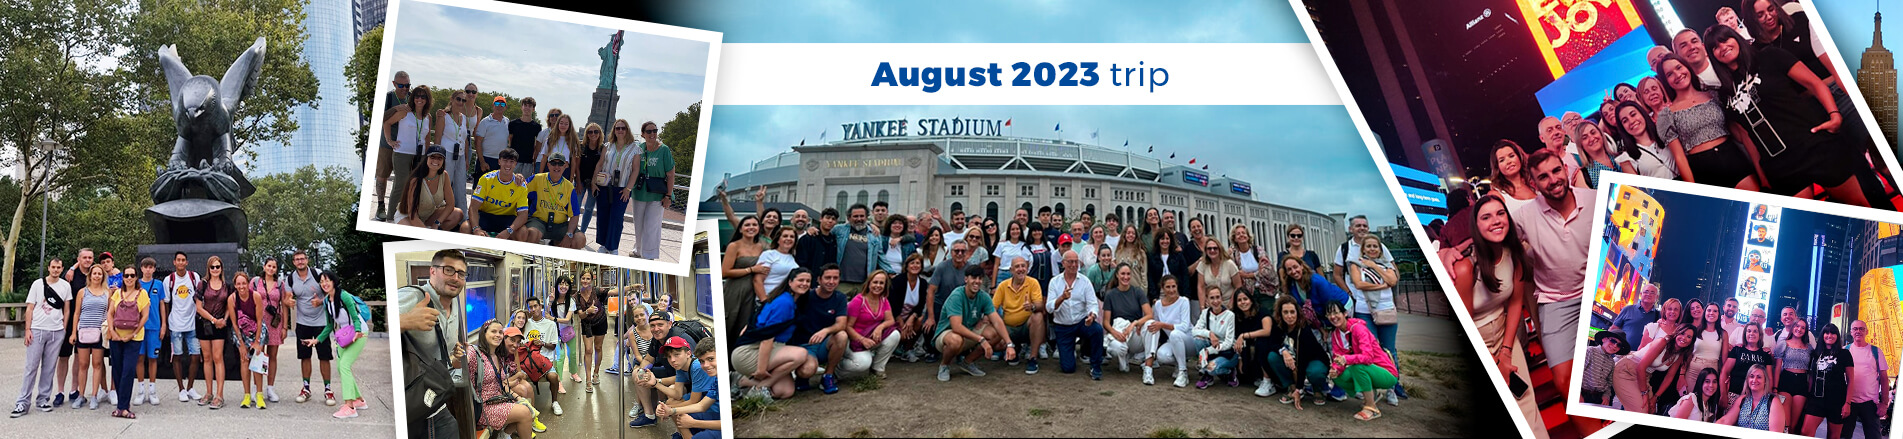 Travel to New York in August 2023 with Flight, Hotel & Guide